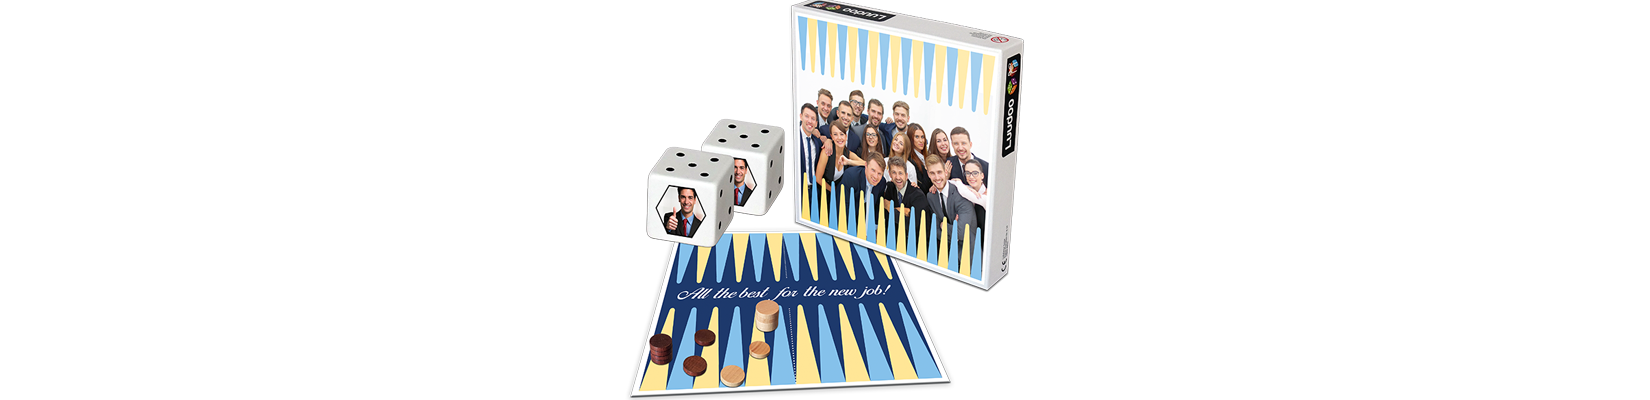 Say goodbye to a workmate in style by designing an individual backgammon sporting all former colleagues